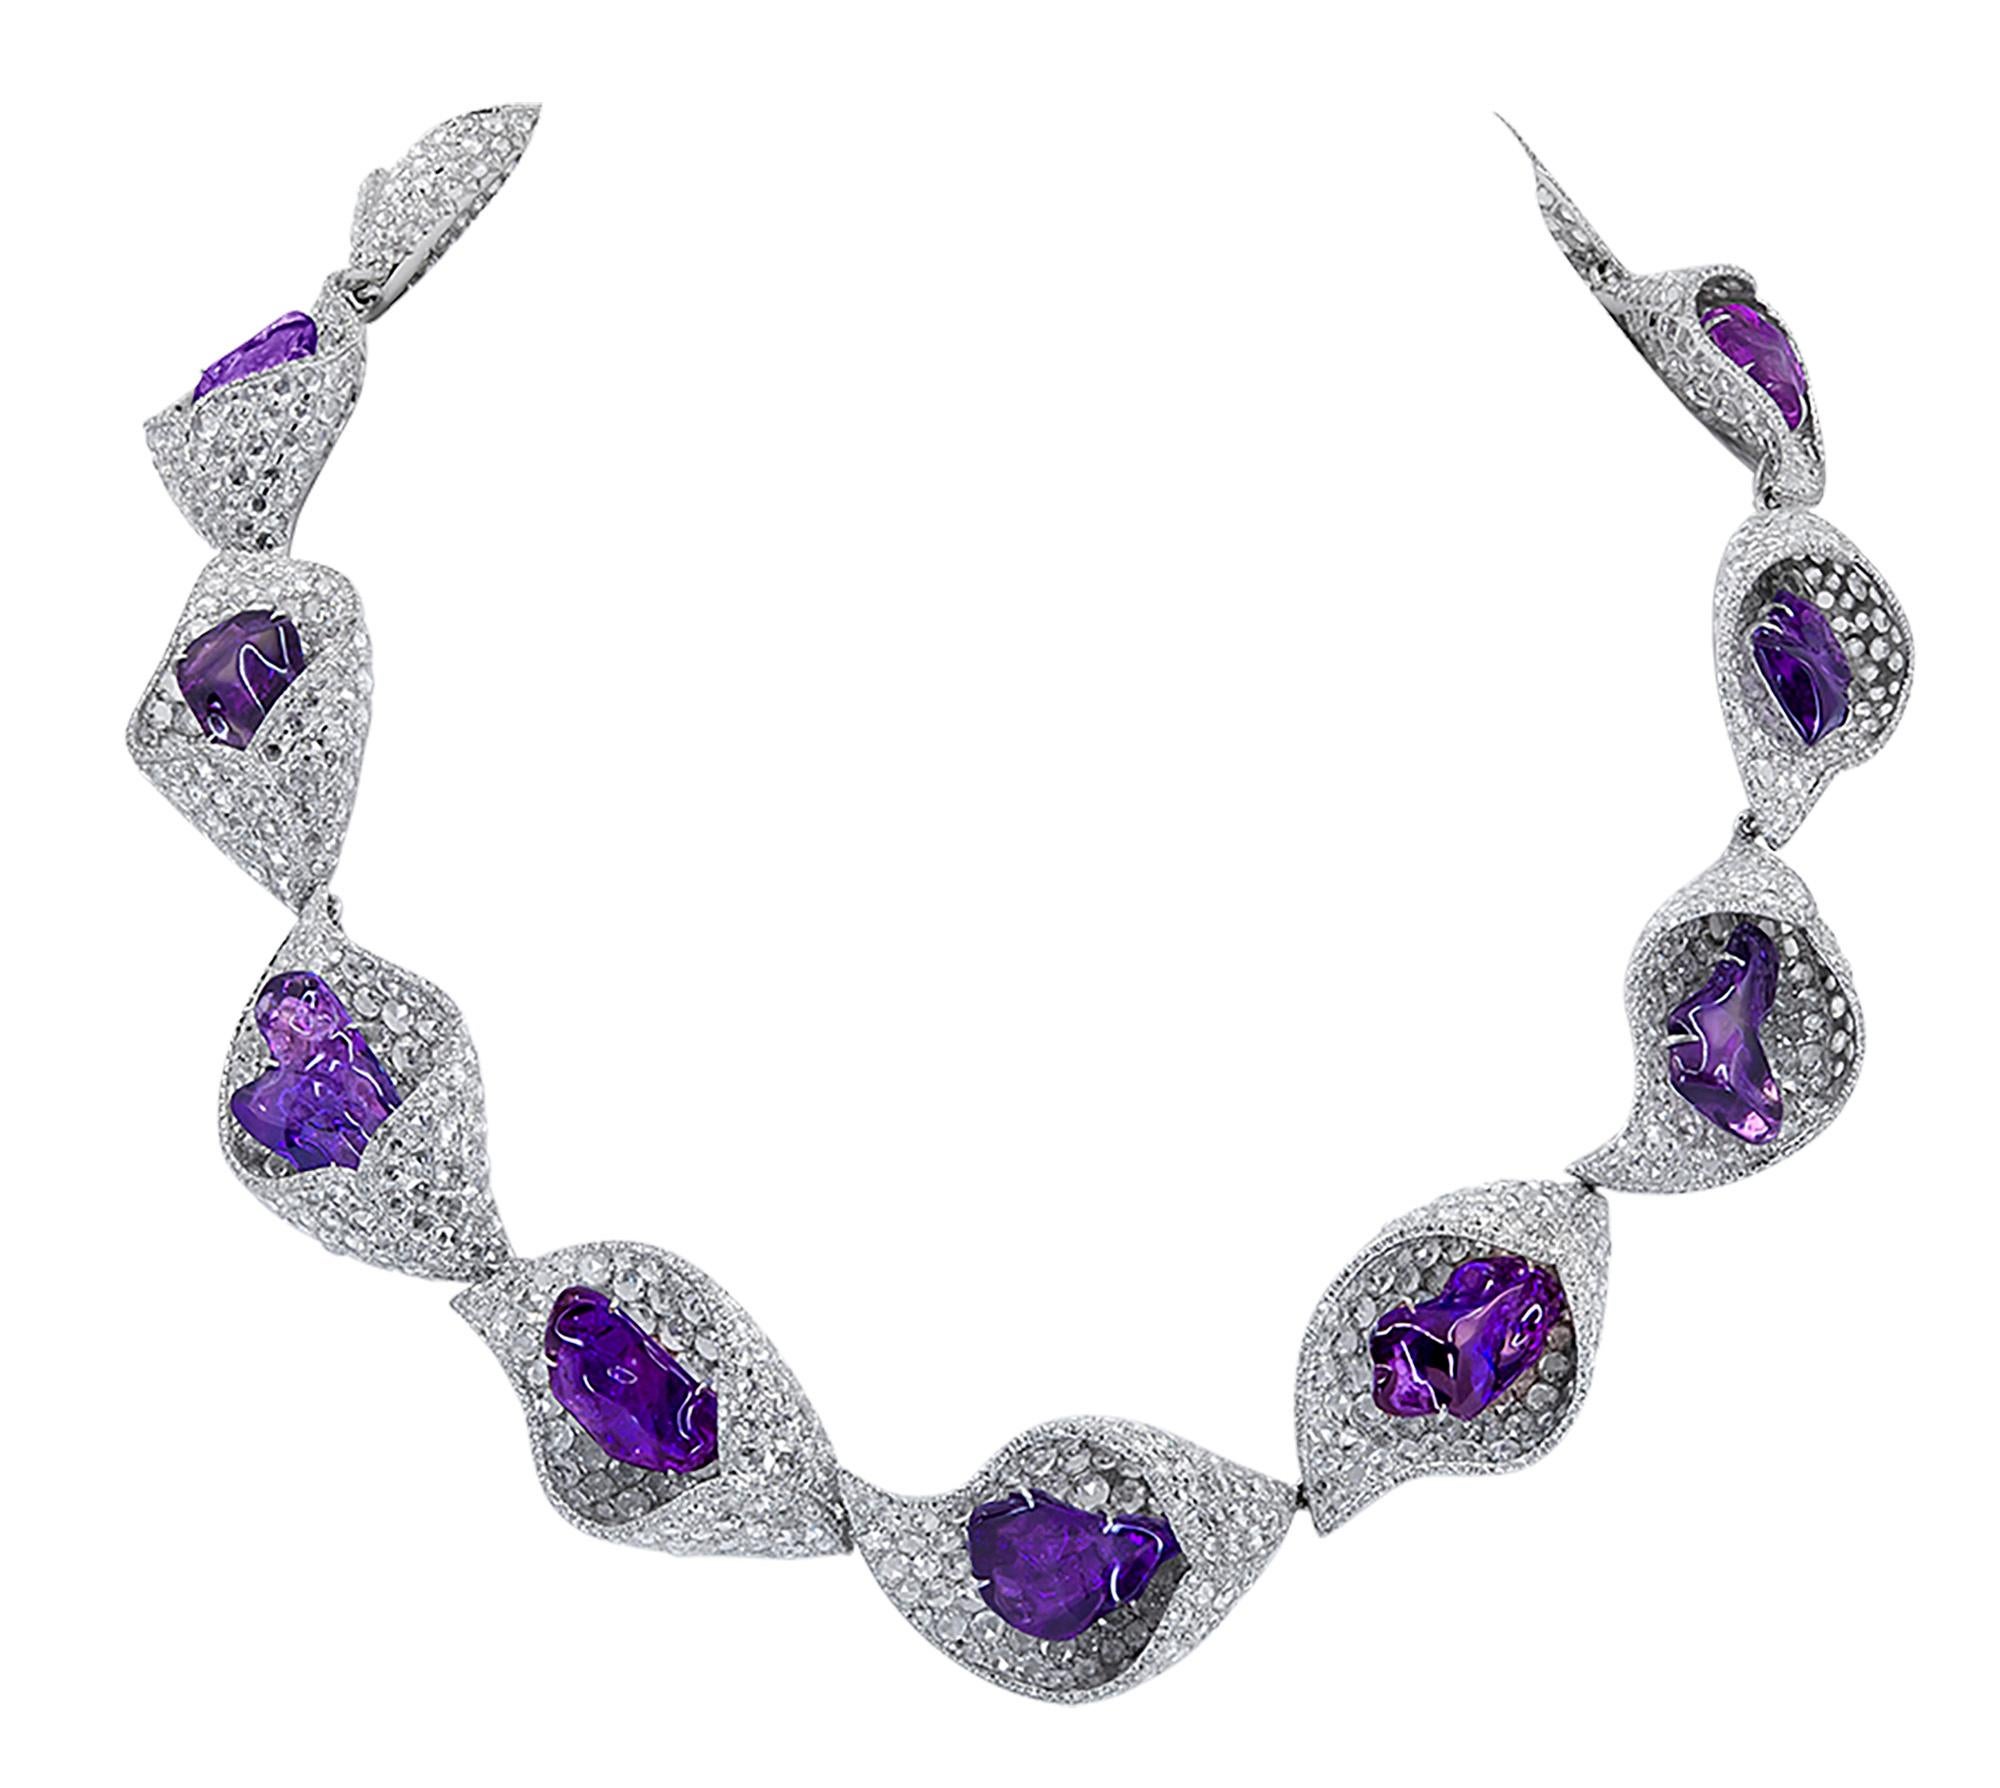 An absolutely stunning and unique necklace and bracelet set comprising of fancy sapphires and white diamonds, created by Forms Hong Kong. 

The cuff bracelet is featuring 9 fancy sapphires weighing  81.50 carats total.
There are 3,300 diamonds